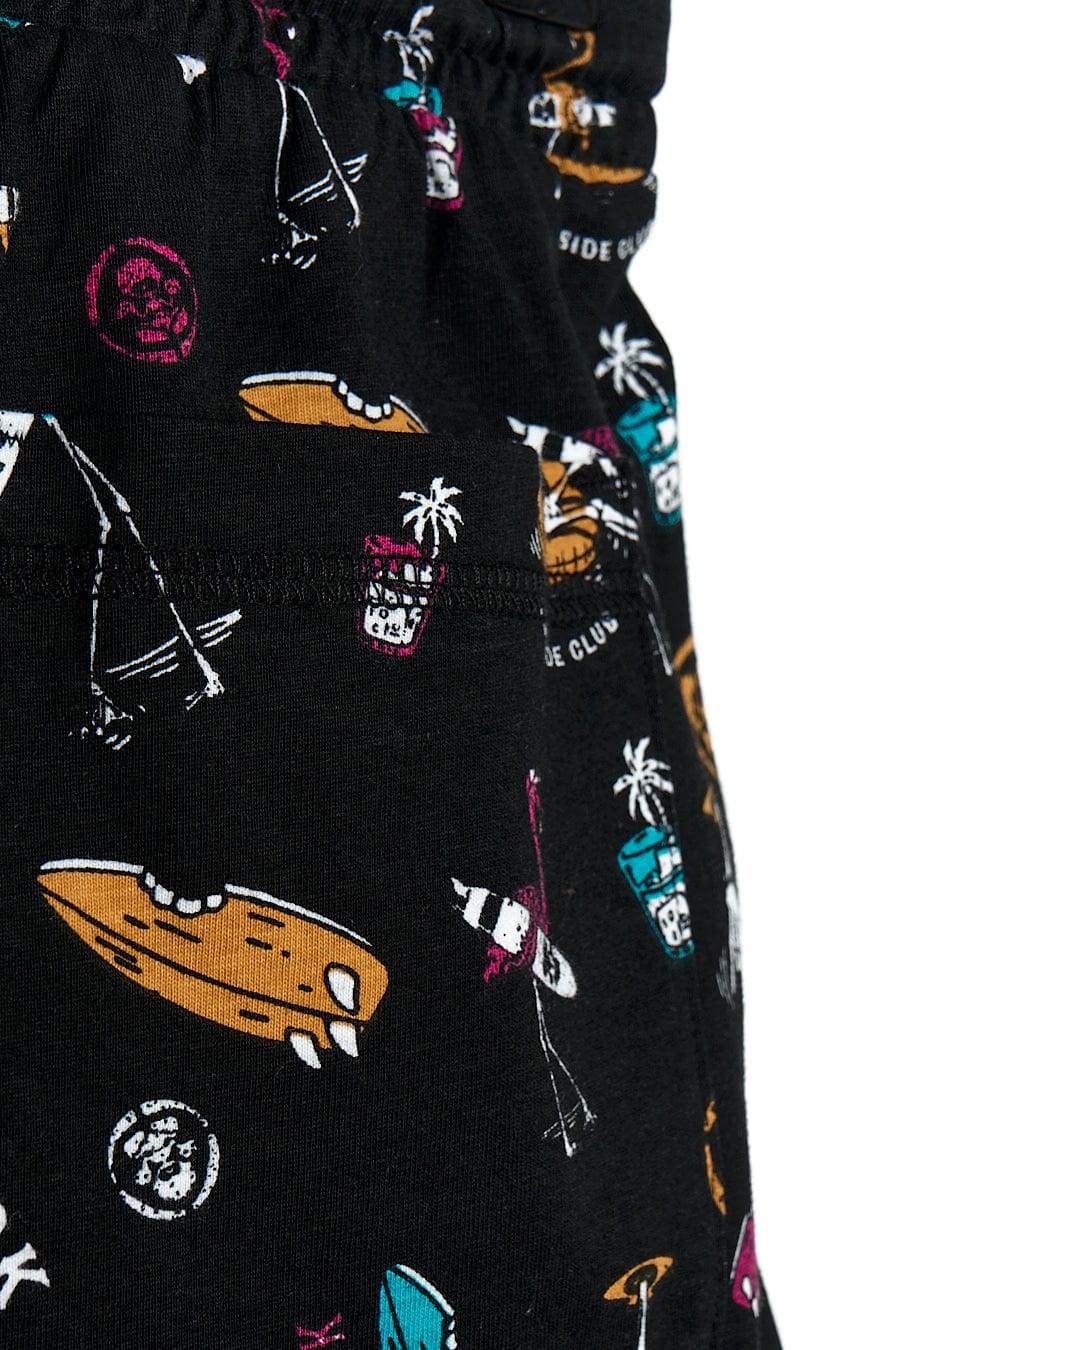 A Poolside Mash - Kids All Over Sweat Short - Black with surfboards and Saltrock on it.